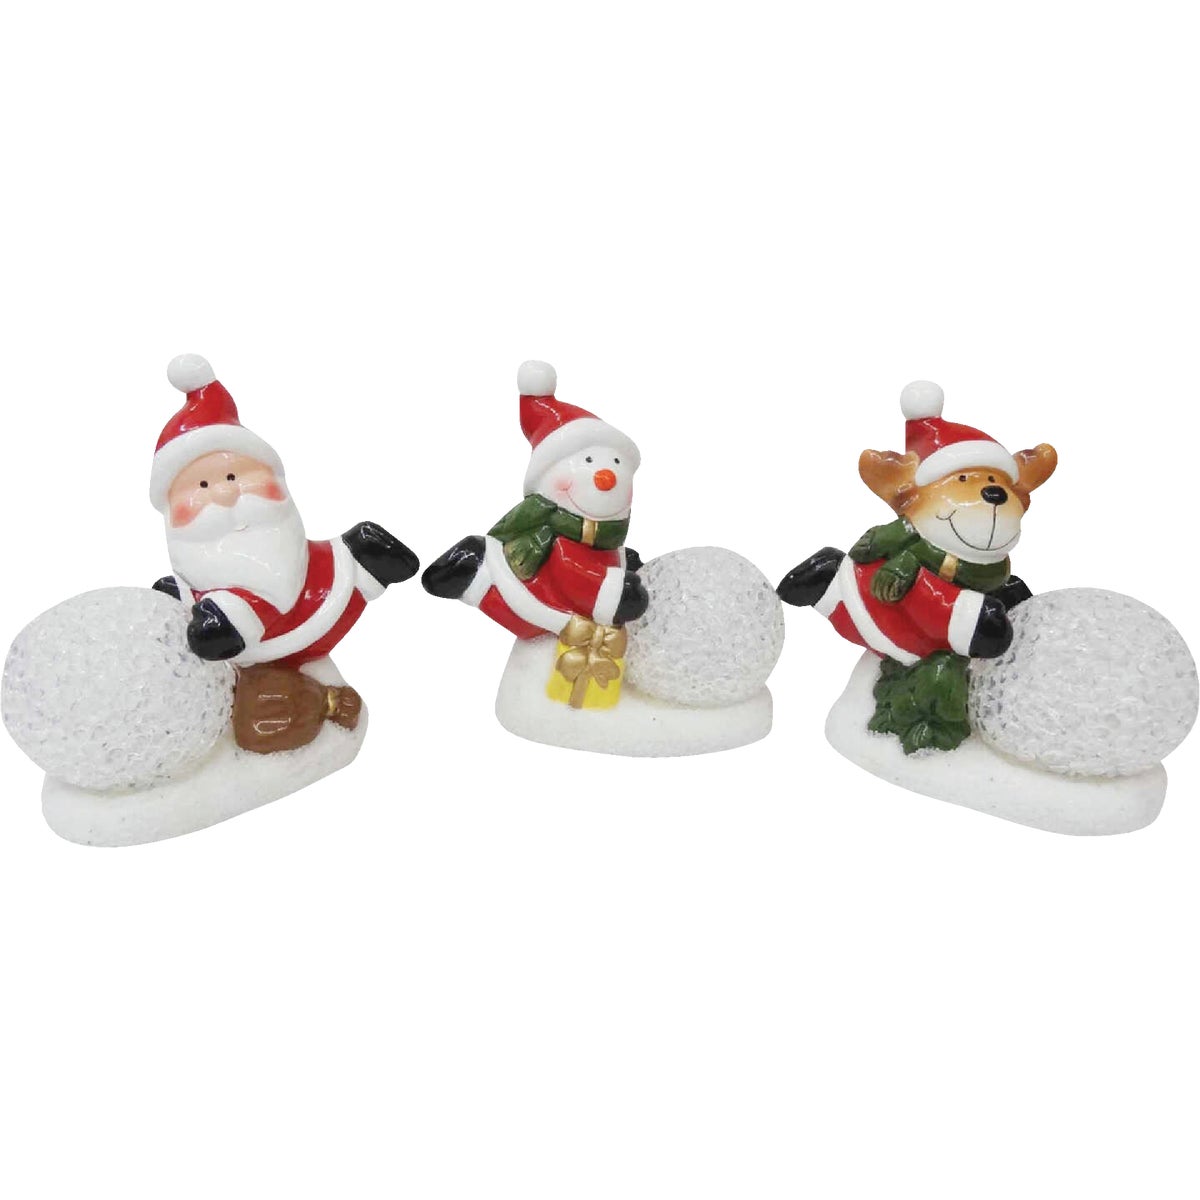 Item 900337, Christmas figurine featuring color changing LED (light emitting diode) 